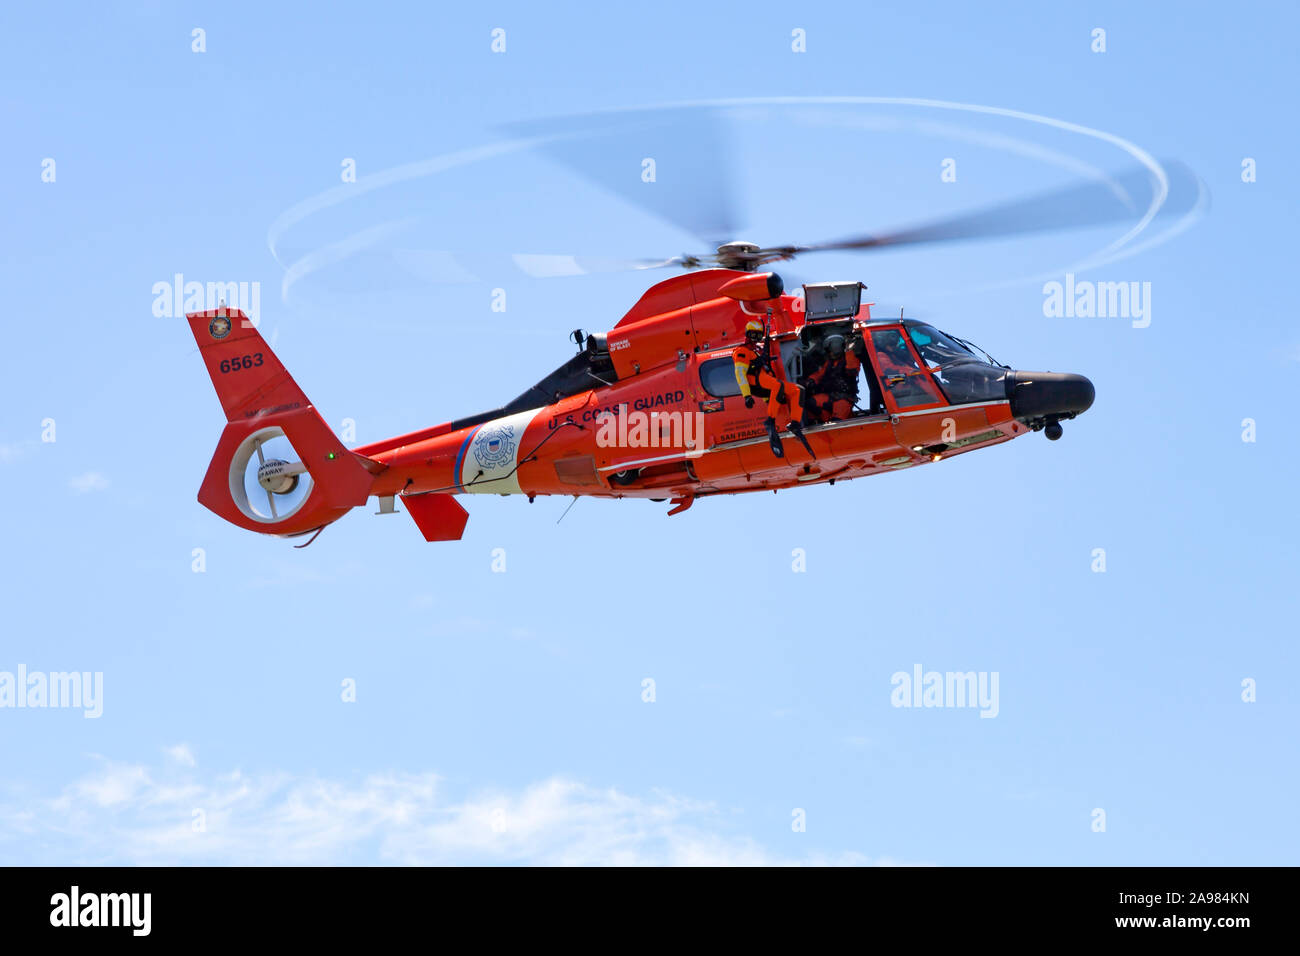 A USCG swimmer hangs from the hoist of an MH-65 Dolphin helicopter Stock Photo